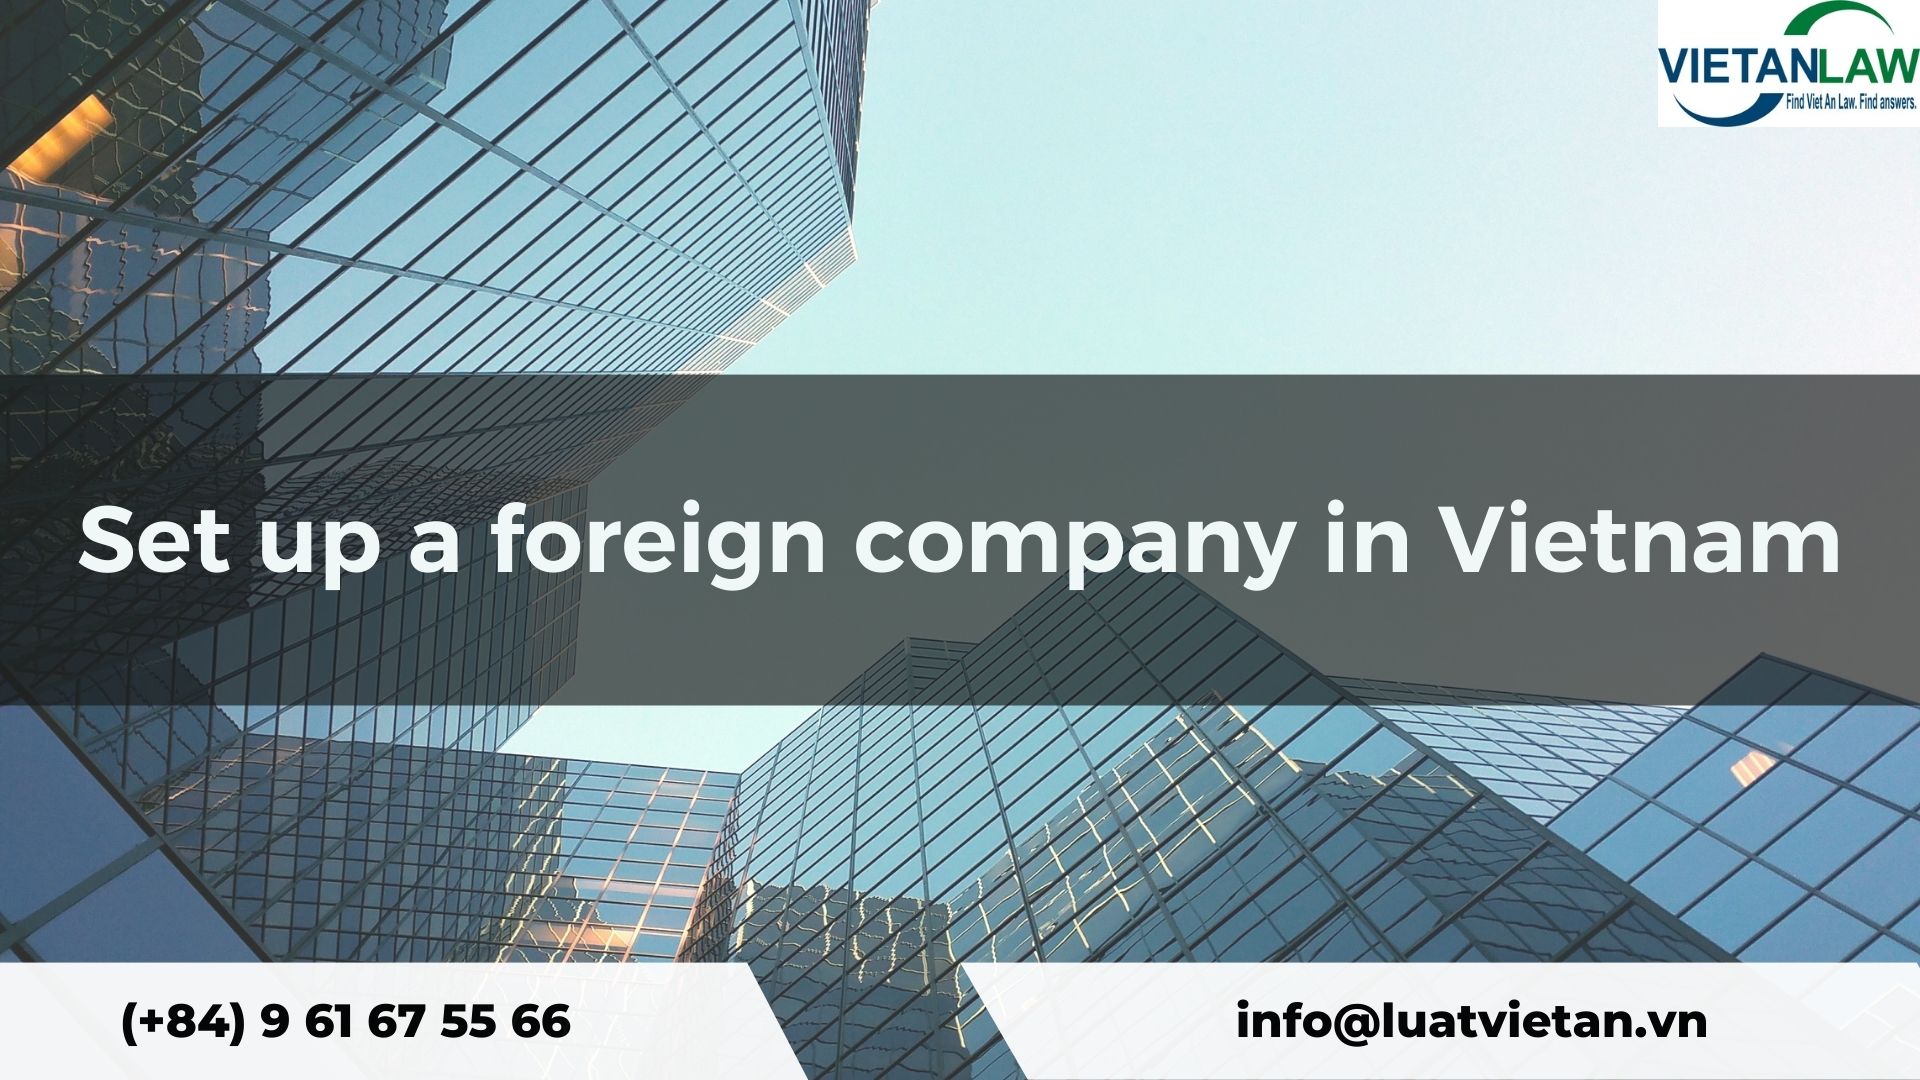 Set up a foreign company in Vietnam